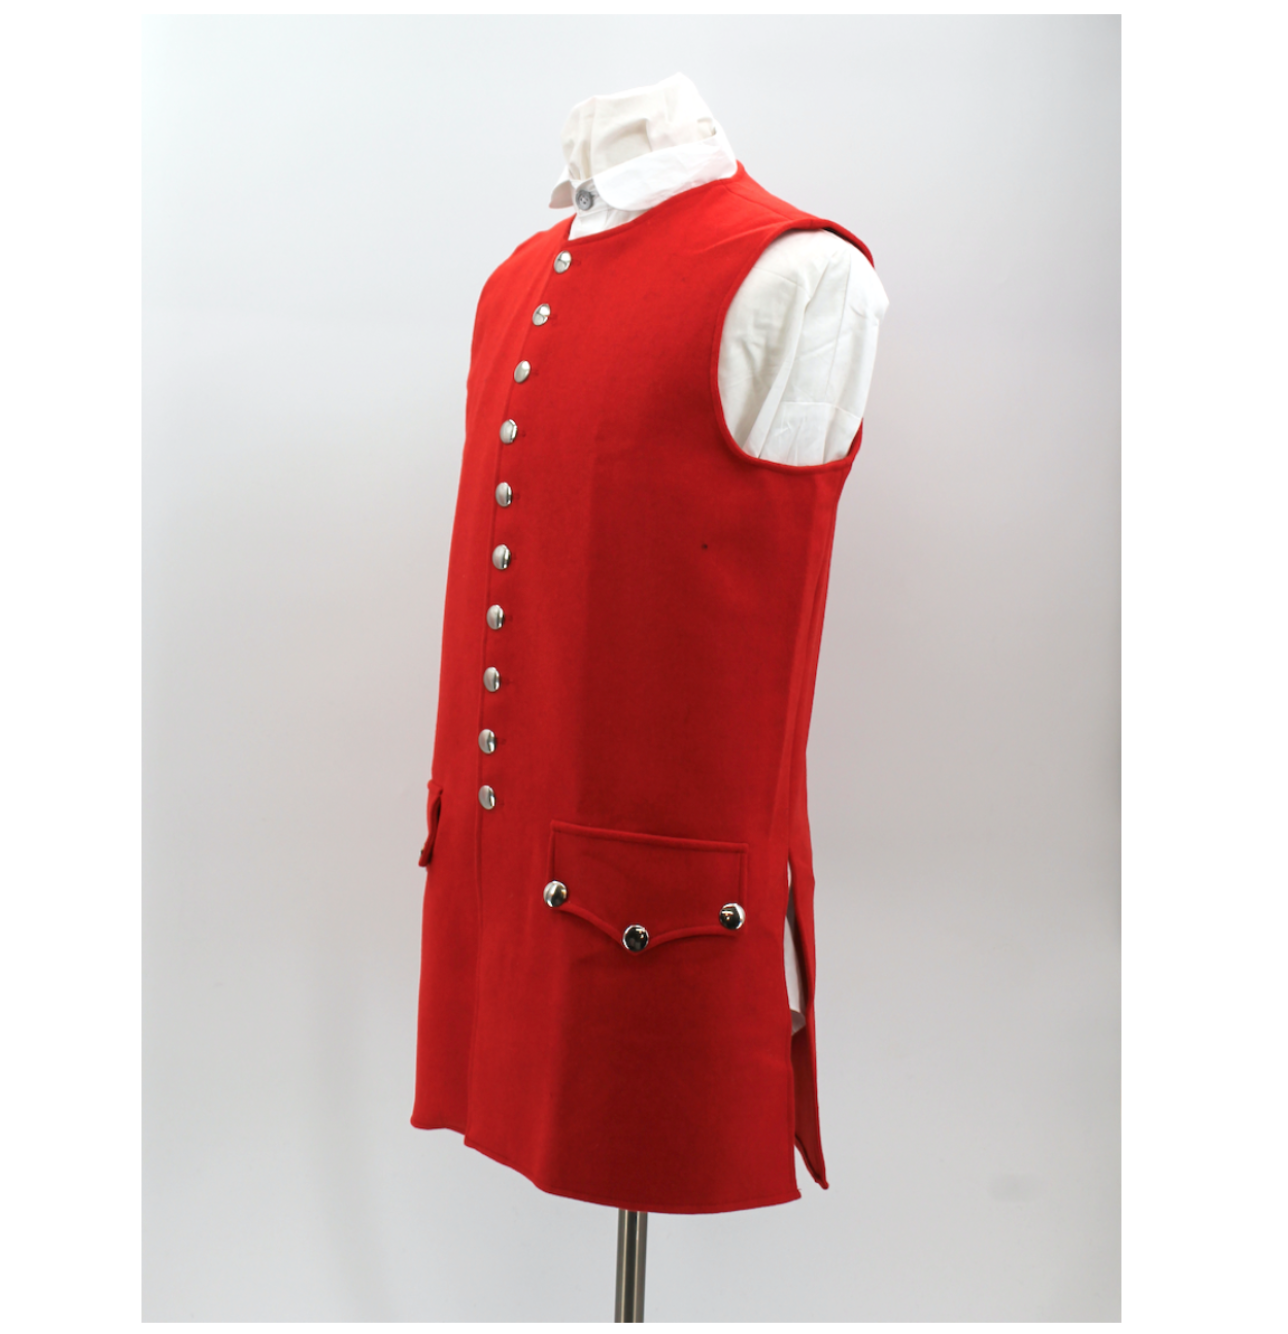 Revive Colonial Elegance: Red Wool Colonial Waistcoat - Perfect for Revolutionary Reenactments